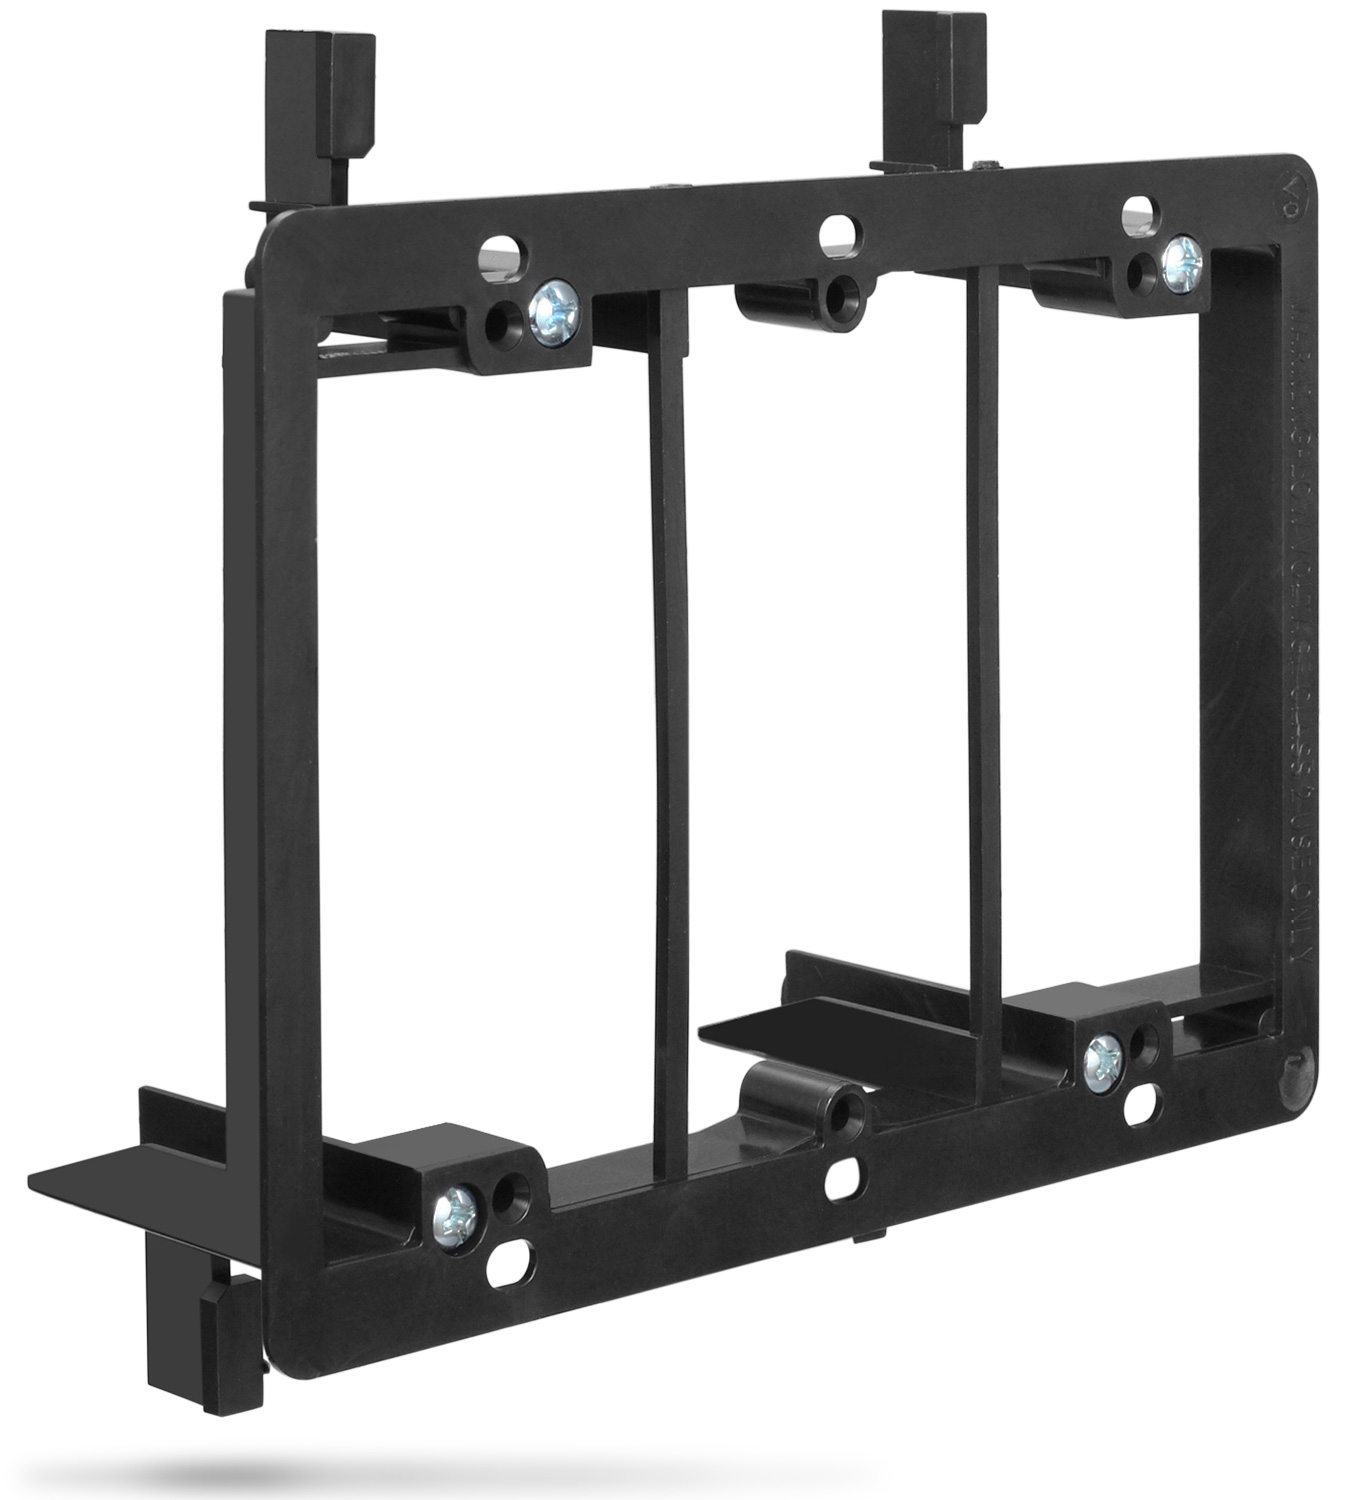 Low Voltage Mounting Bracket (3 Gang), Fosmon Low Voltage Mounting Bracket (Mounting Screws Included) for Telephone Wires, Network Cables, HDMI, Coaxial, and Speaker Cables - image 1 of 4